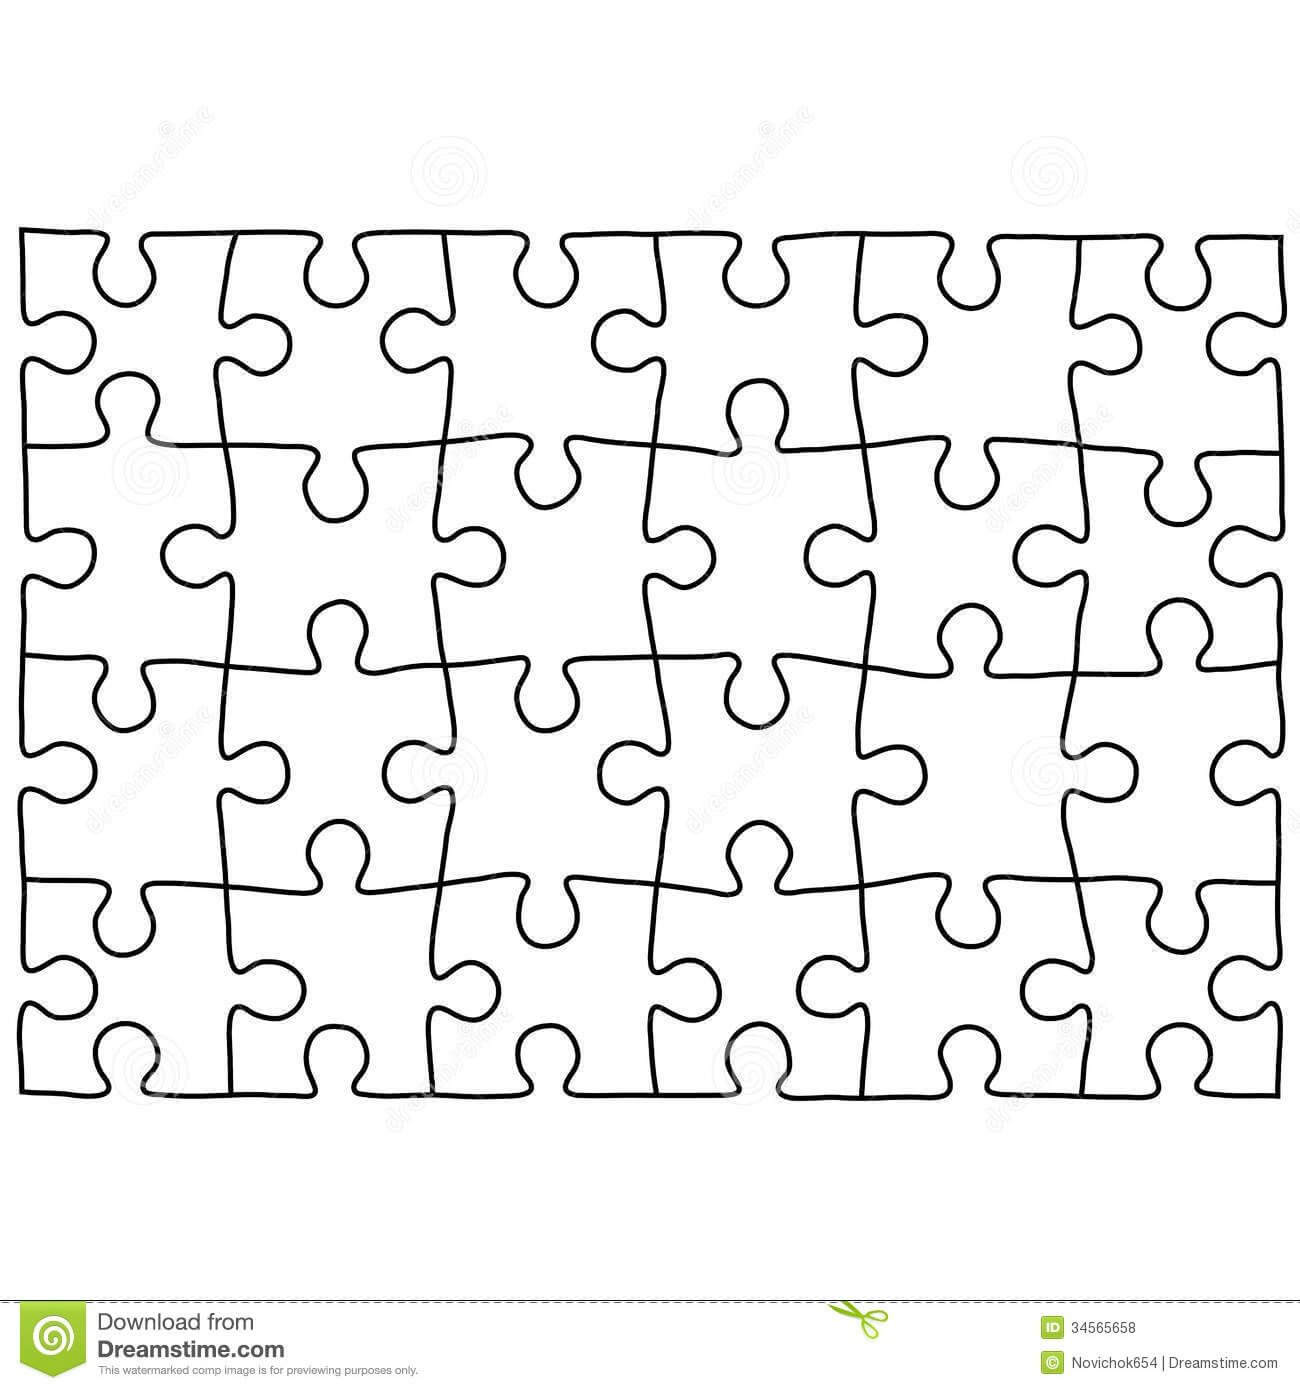 026 Jig Saw Puzzle Template Ideas Astounding Jigsaw Vector In Jigsaw Puzzle Template For Word